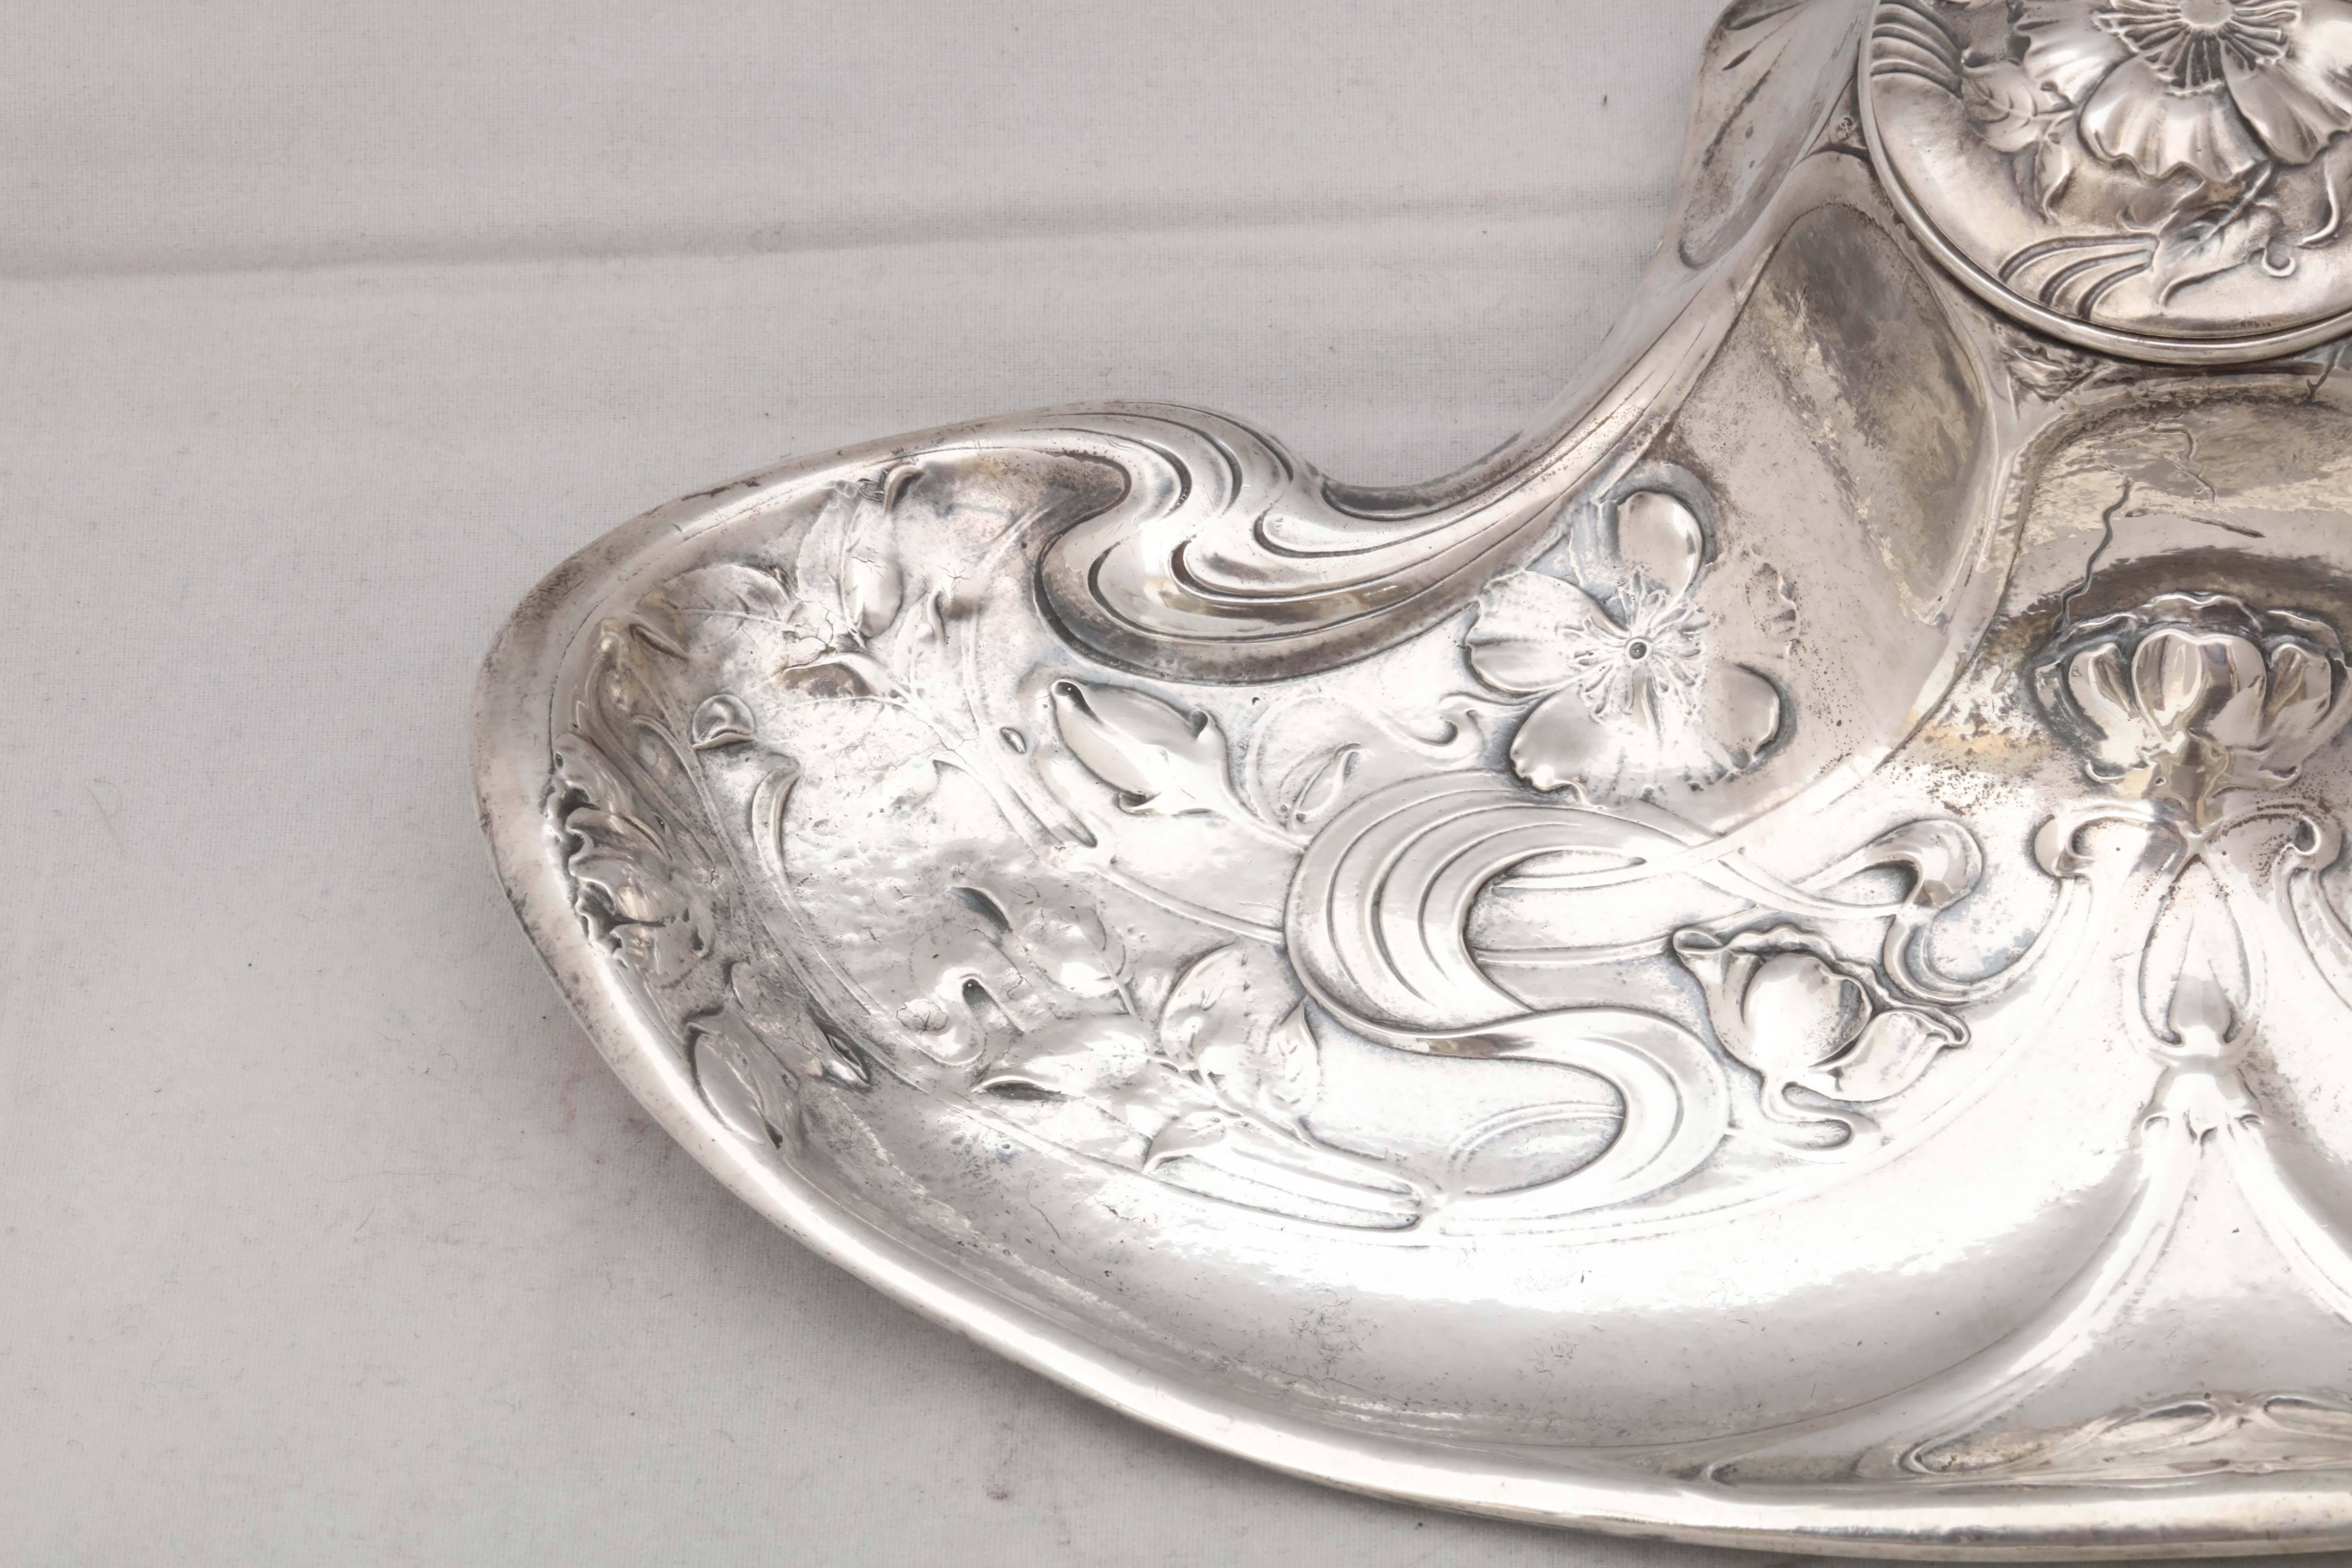 Fabulous, rare, sterling silver (.950) Art Nouveau, Martele inkstand with ball feet and hinged lid, the Gorham Manufacturing Corp., Providence, Rhode Island, circa 1905. According to the PTB mark on the underside, most probably, the Gorham